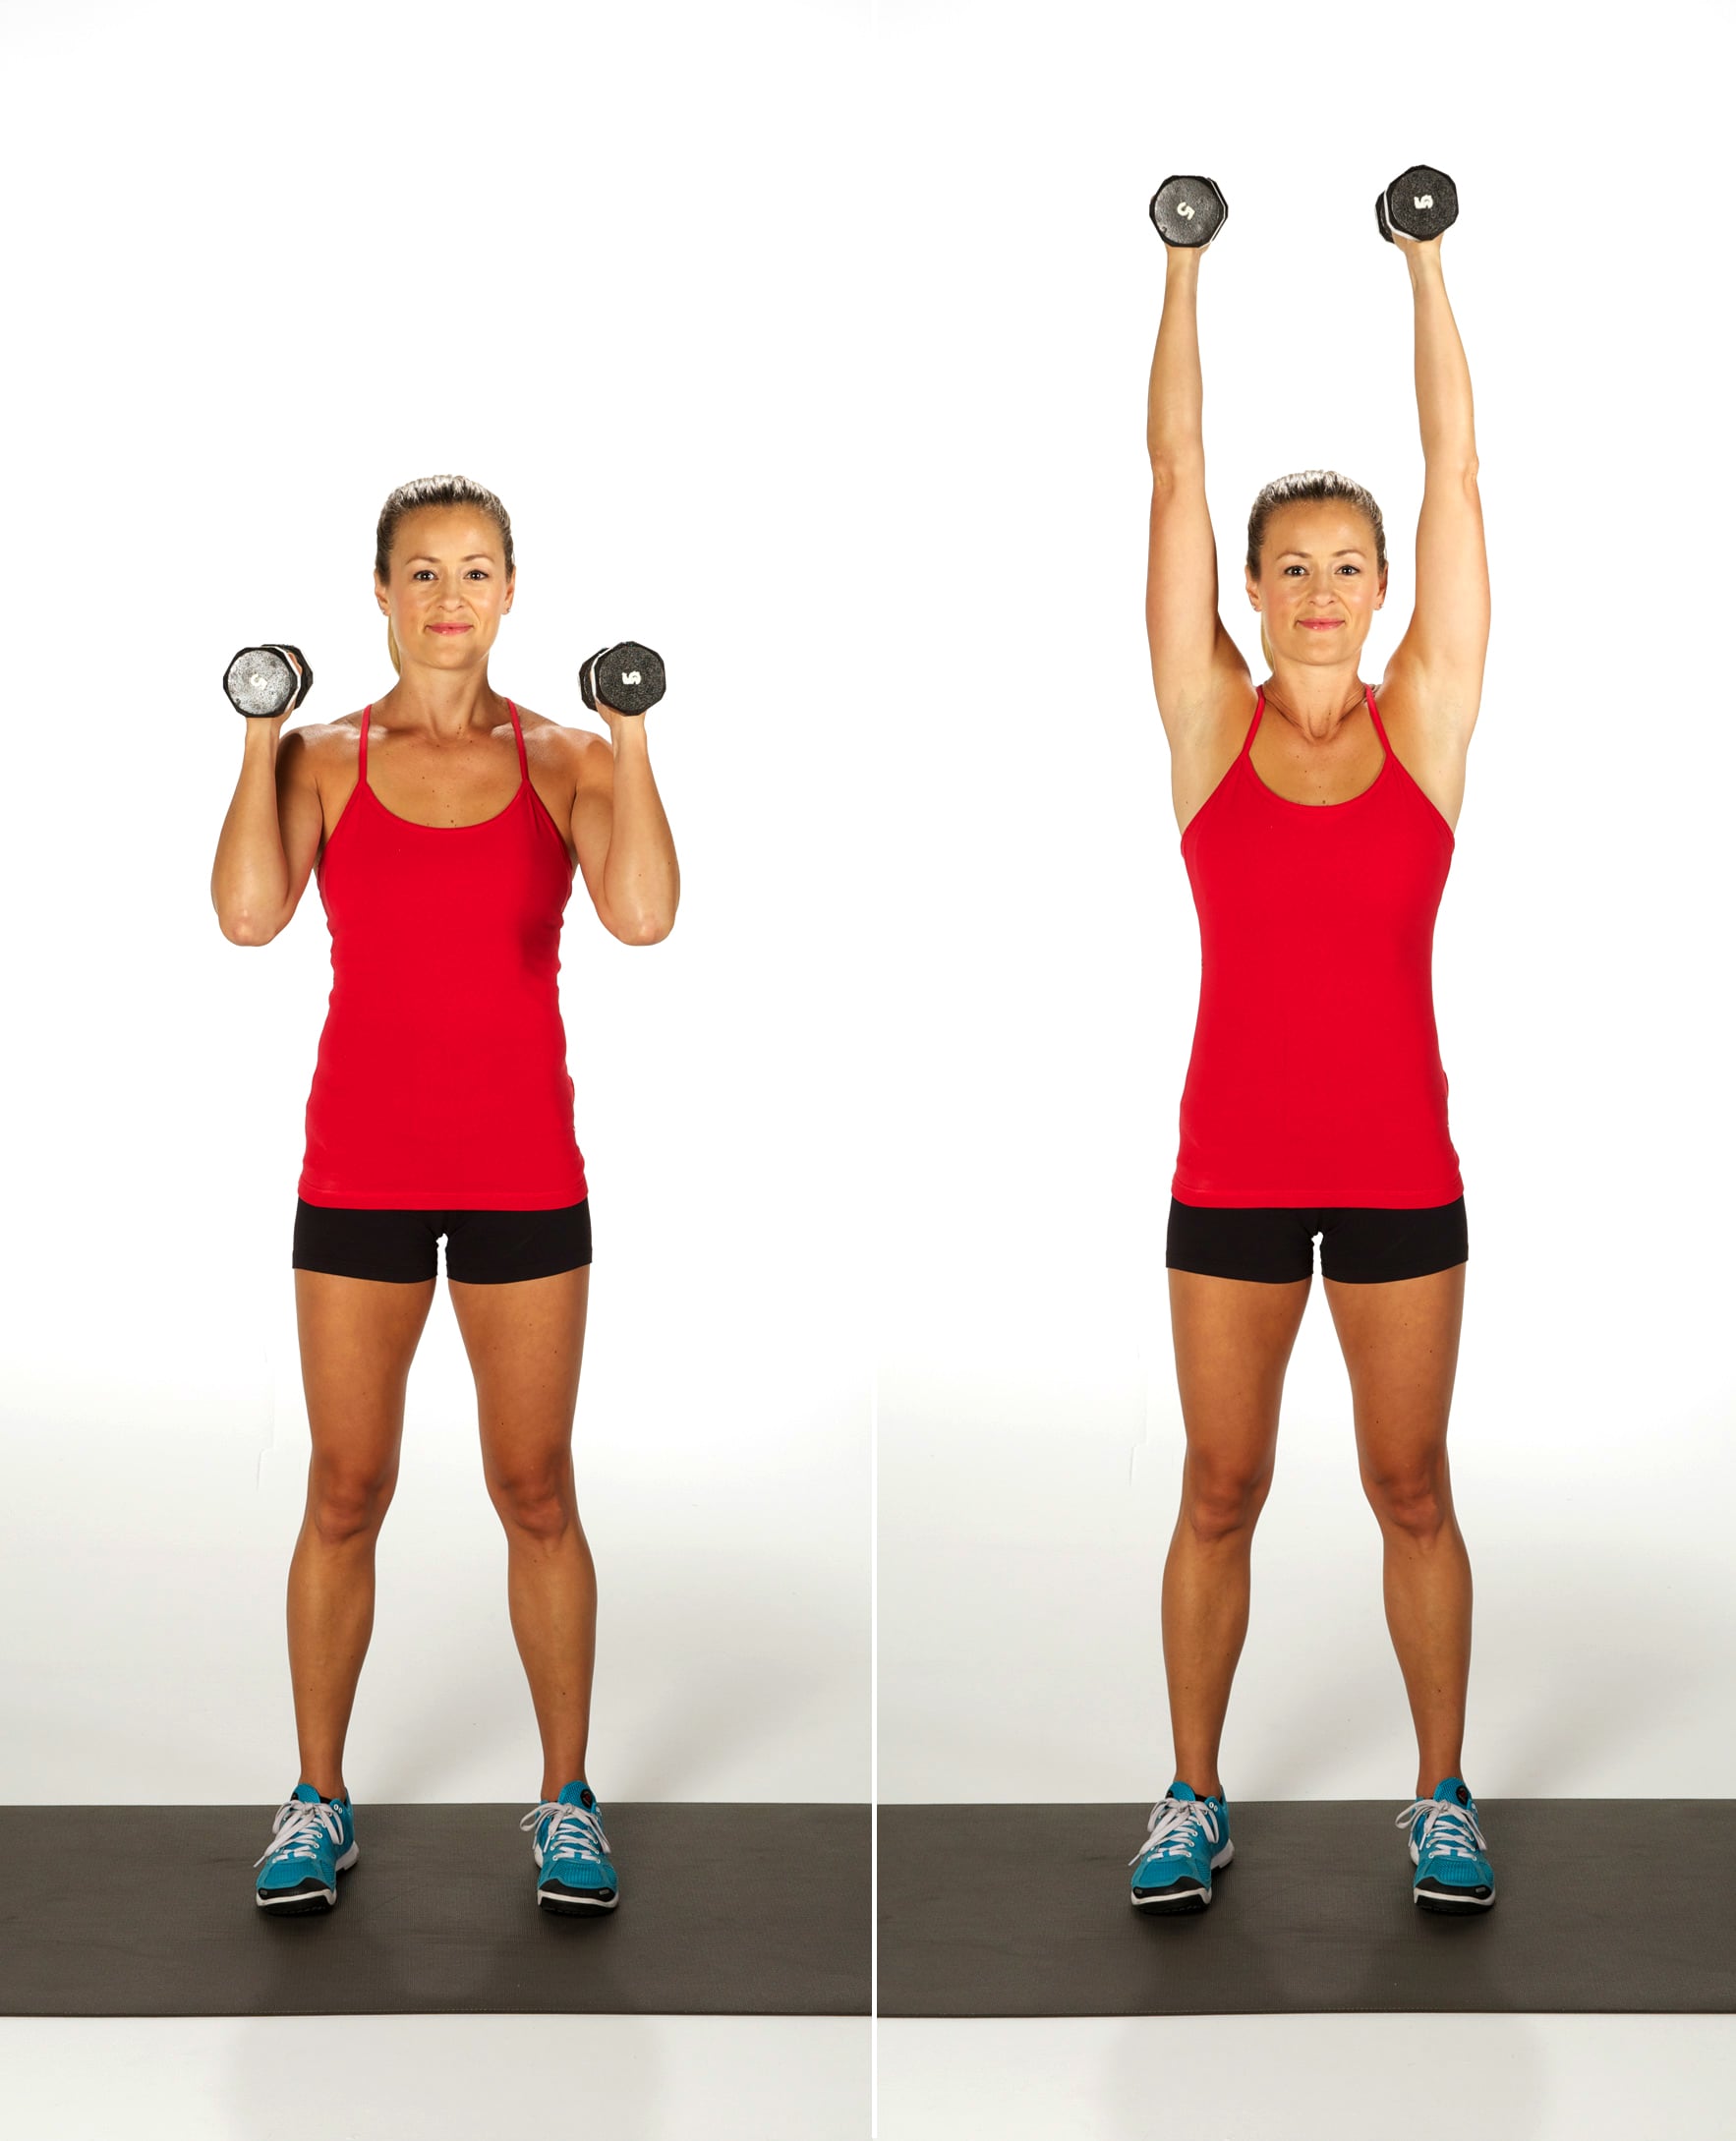 Top dumbbell exercises for your shoulders, back and arms